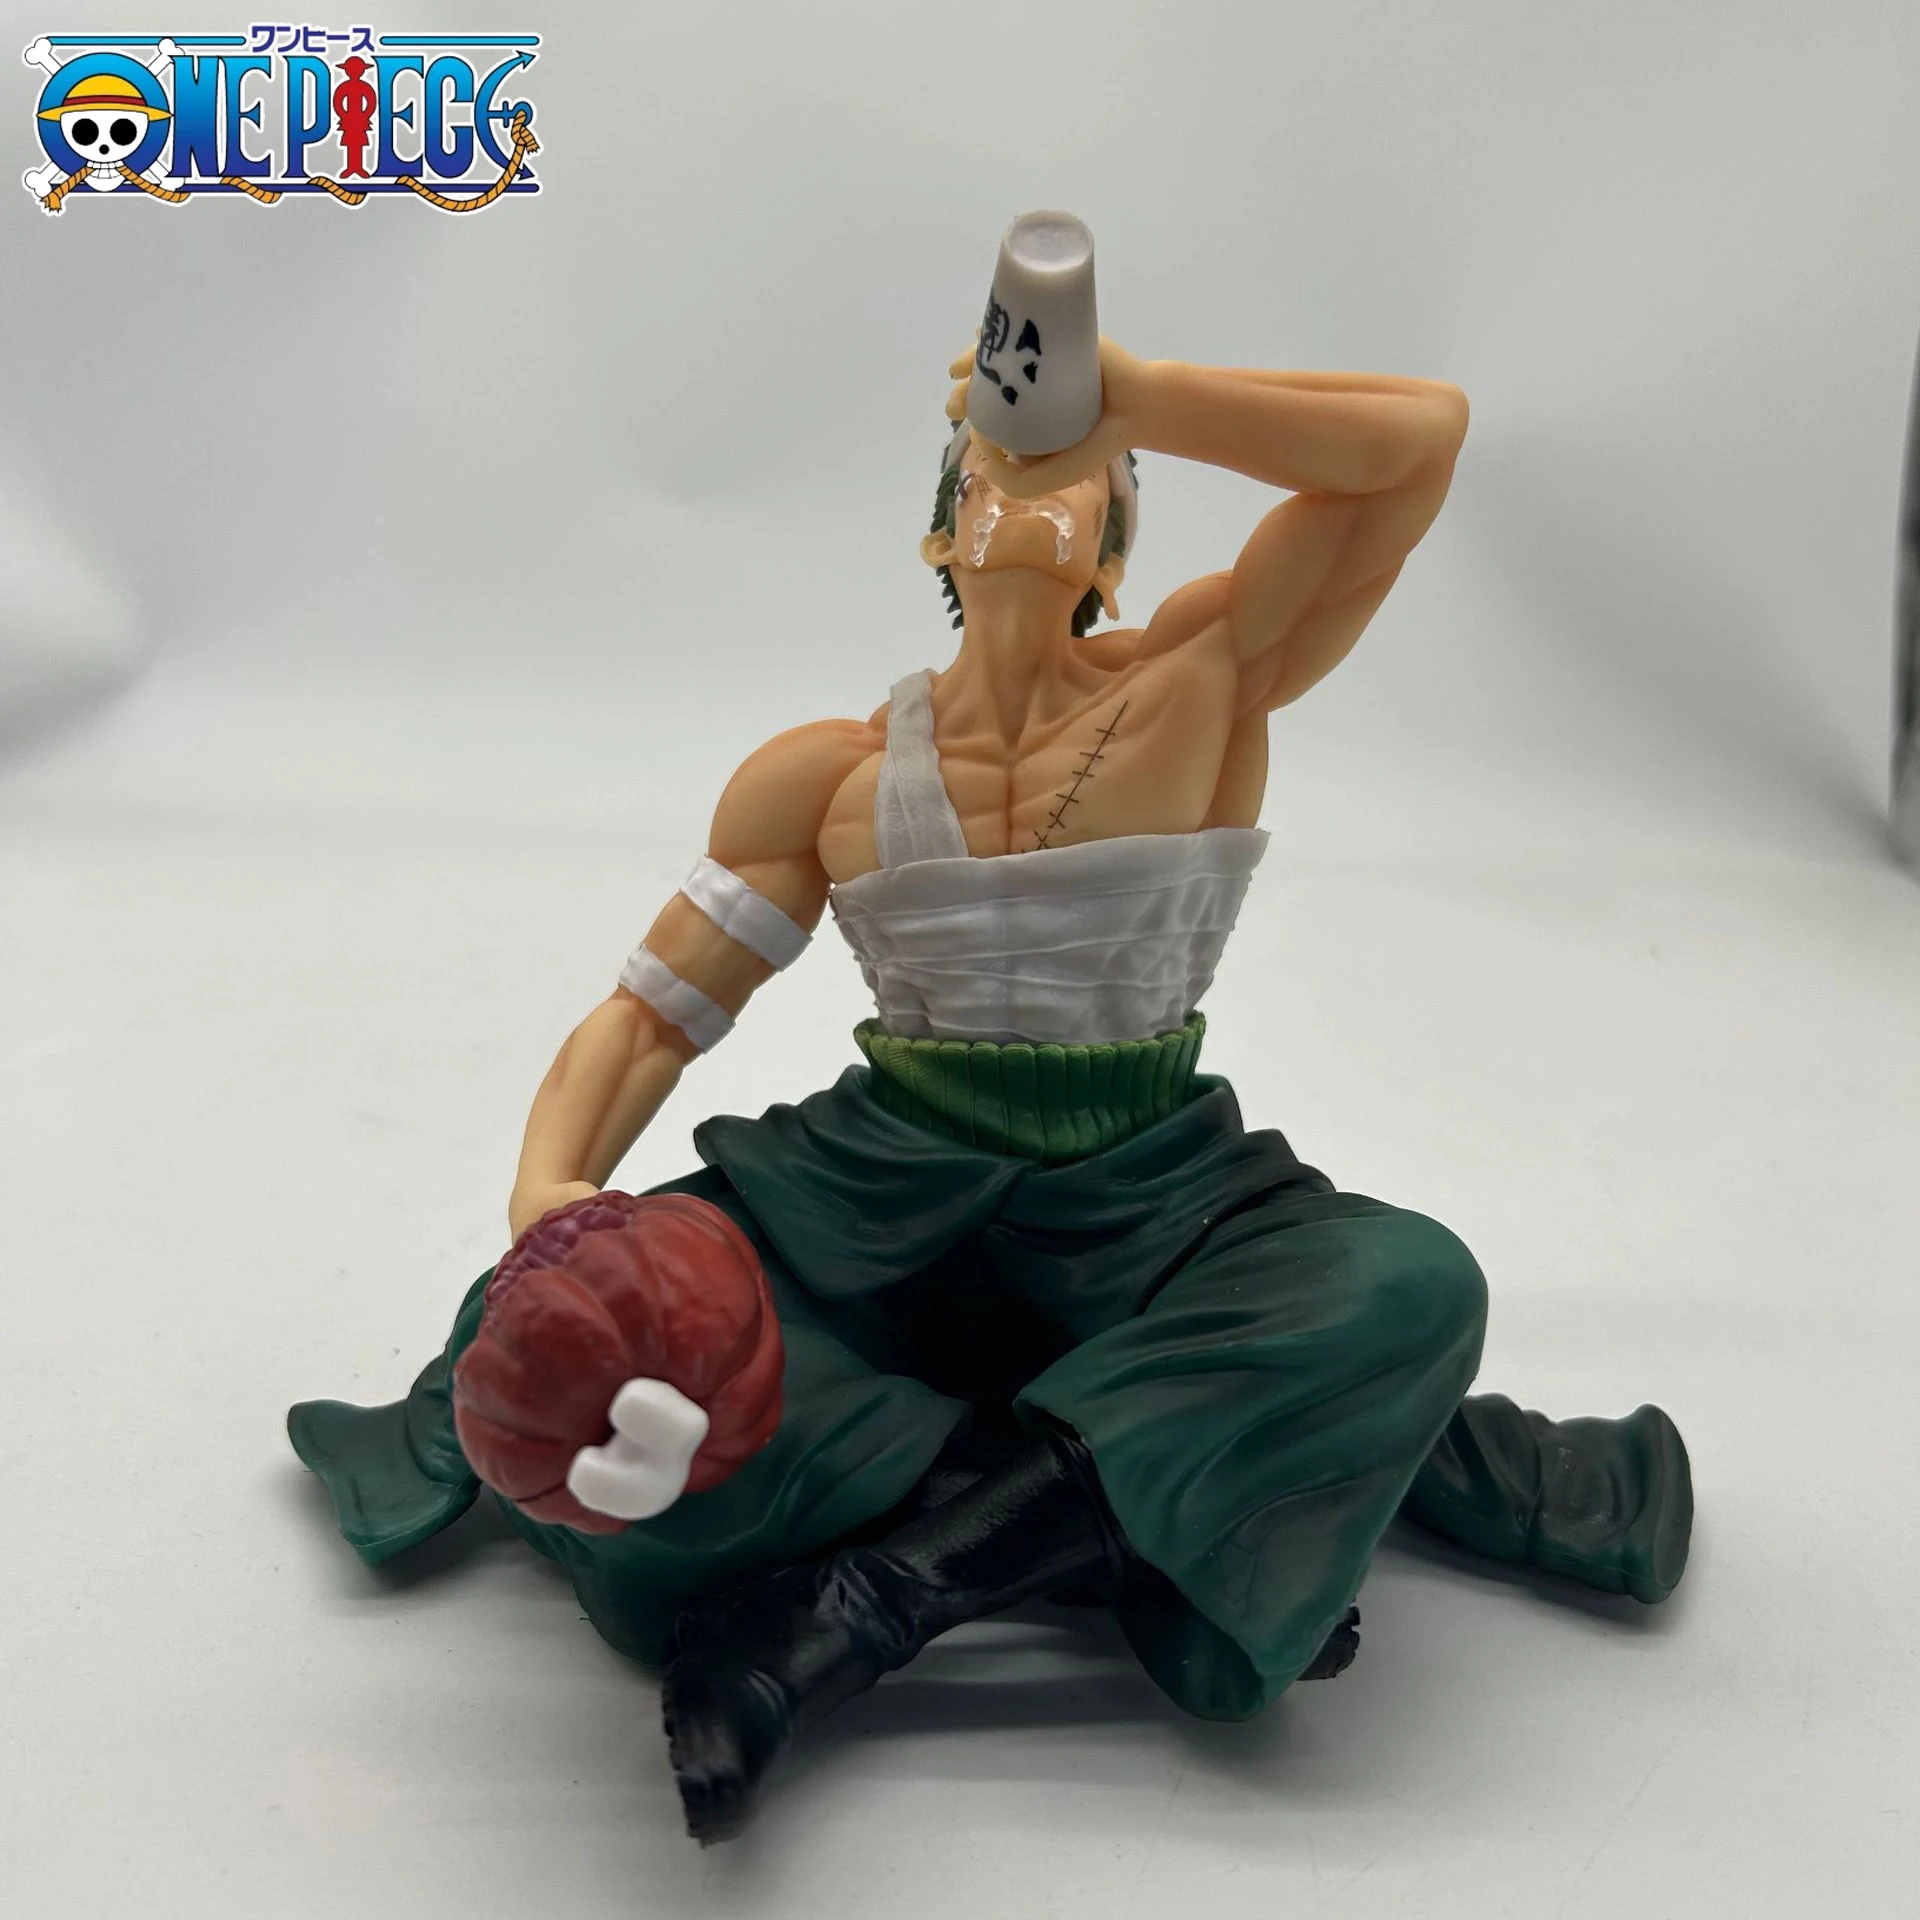 15cm Anime One Piece Roronoa Zoro Figure Wano Country Drink Bandage Zoro  Statue Pvc Action Figurine Collection Model Toy Gift